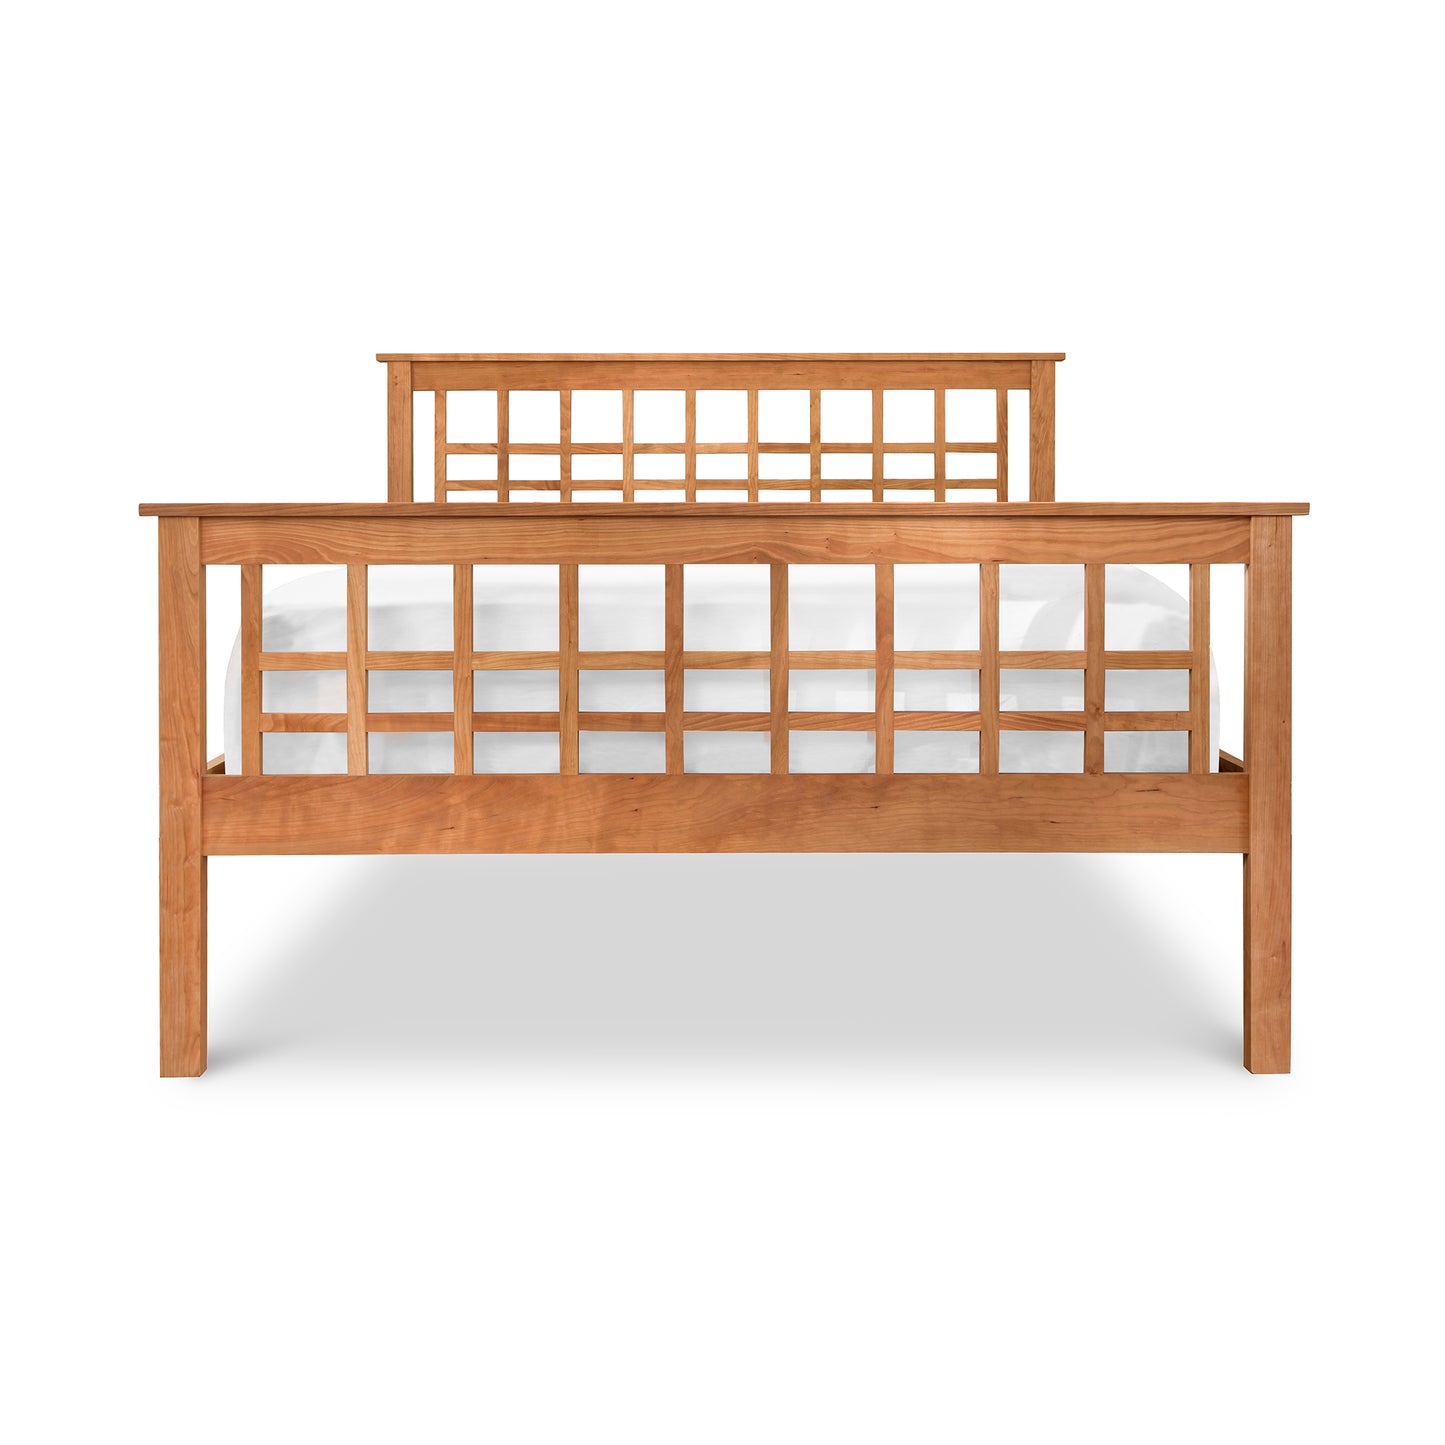 Modern Craftsman High Footboard Bed by Vermont Furniture Designs with a lattice headboard design, isolated on a white background.